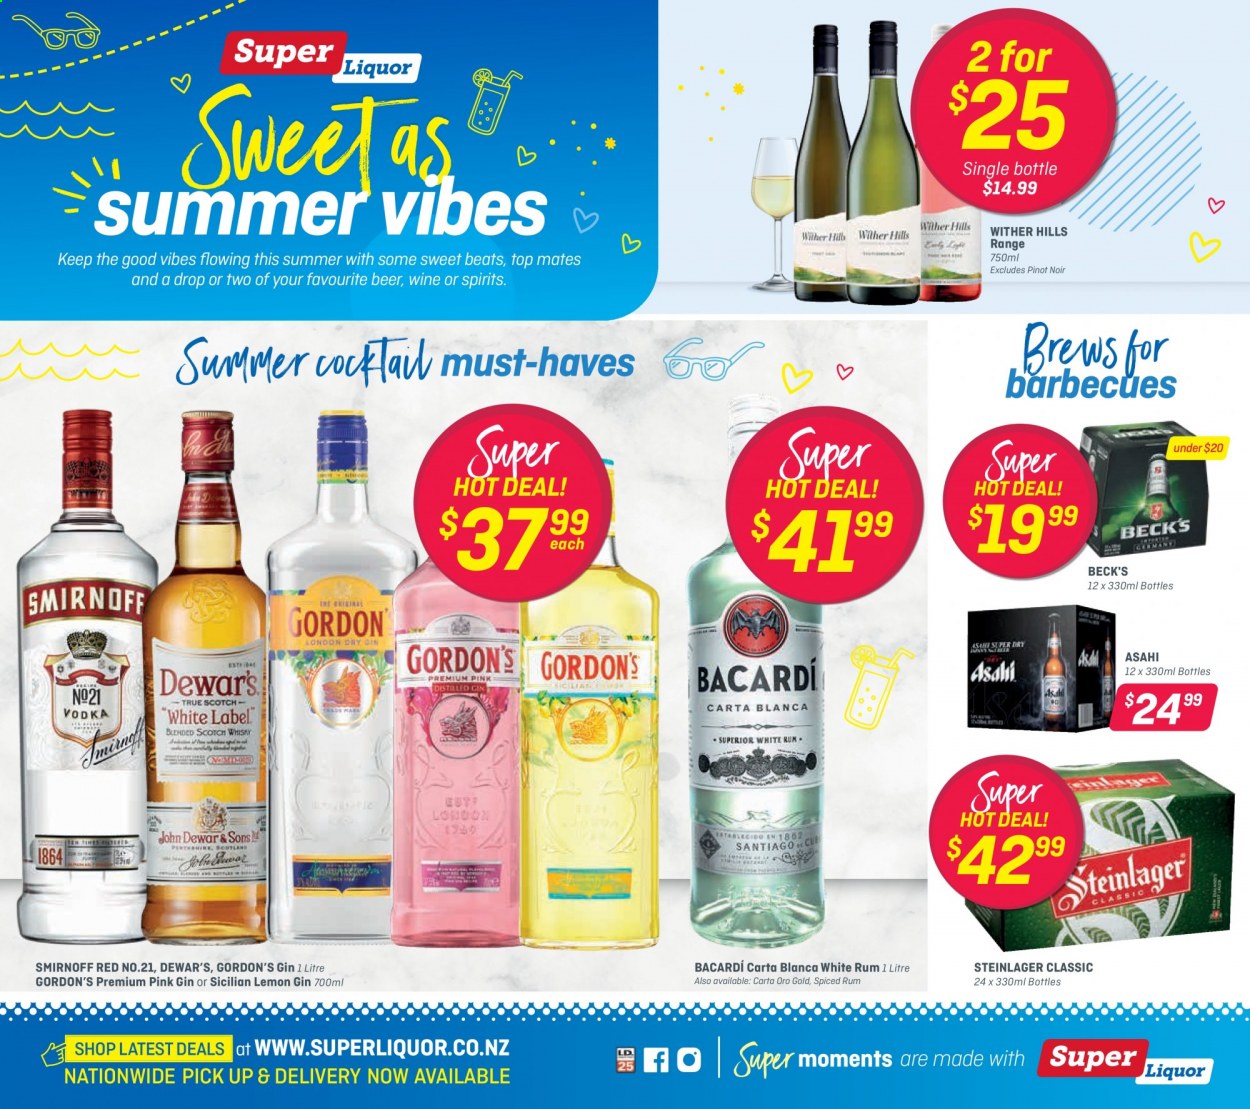 thumbnail - Super Liquor mailer - 01.02.2021 - 14.02.2021 - Sales products - wine, Pinot Noir, Wither Hills, Bacardi, gin, rum, Smirnoff, spiced rum, Gordon's. Page 1.